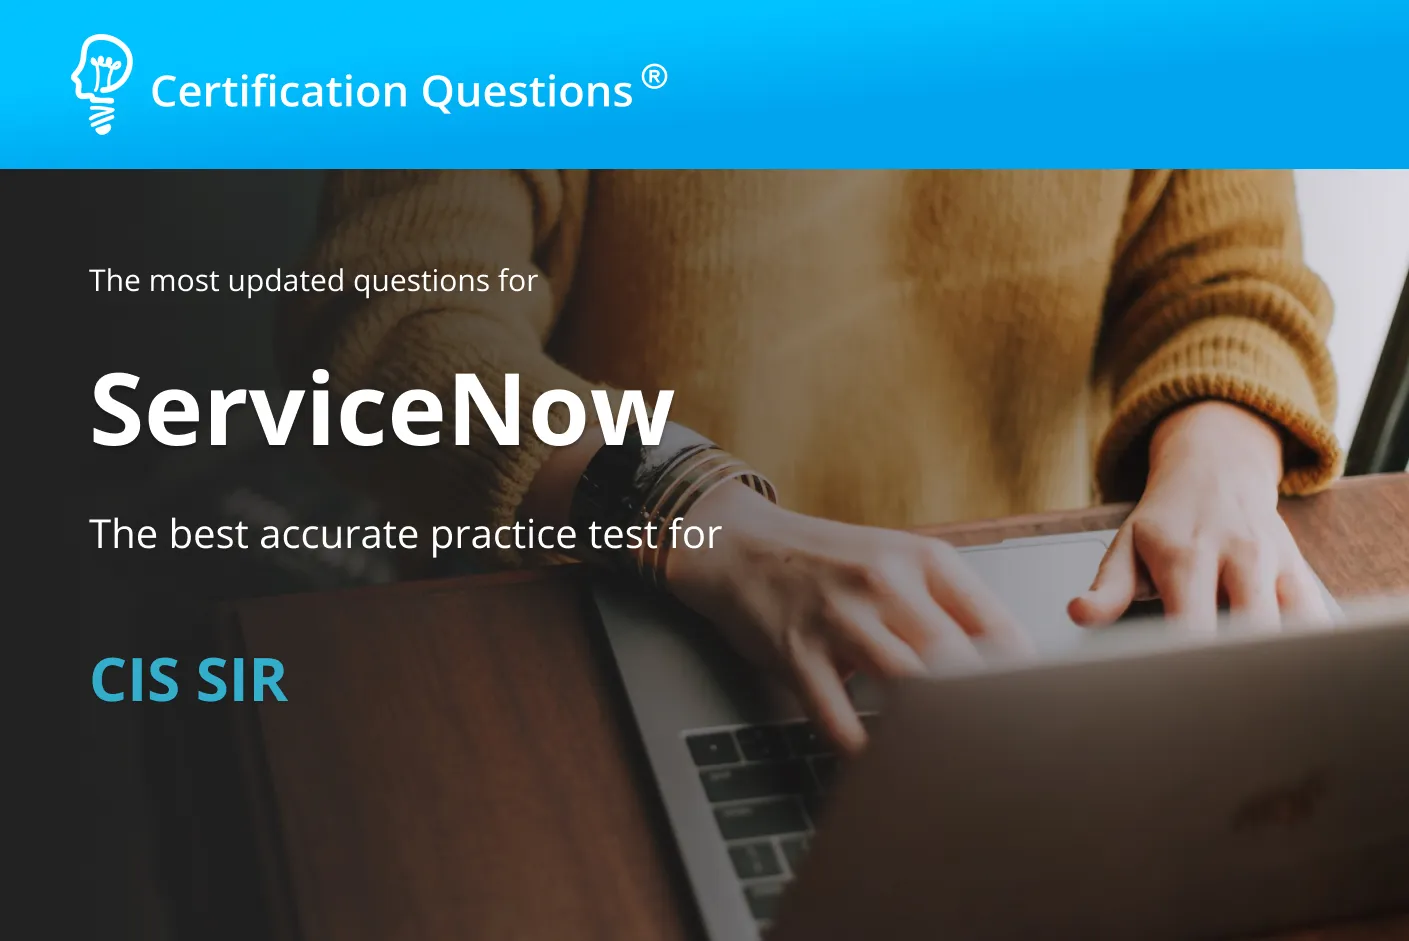 This image is related to the study guide of the servicenow csi-sir practice test